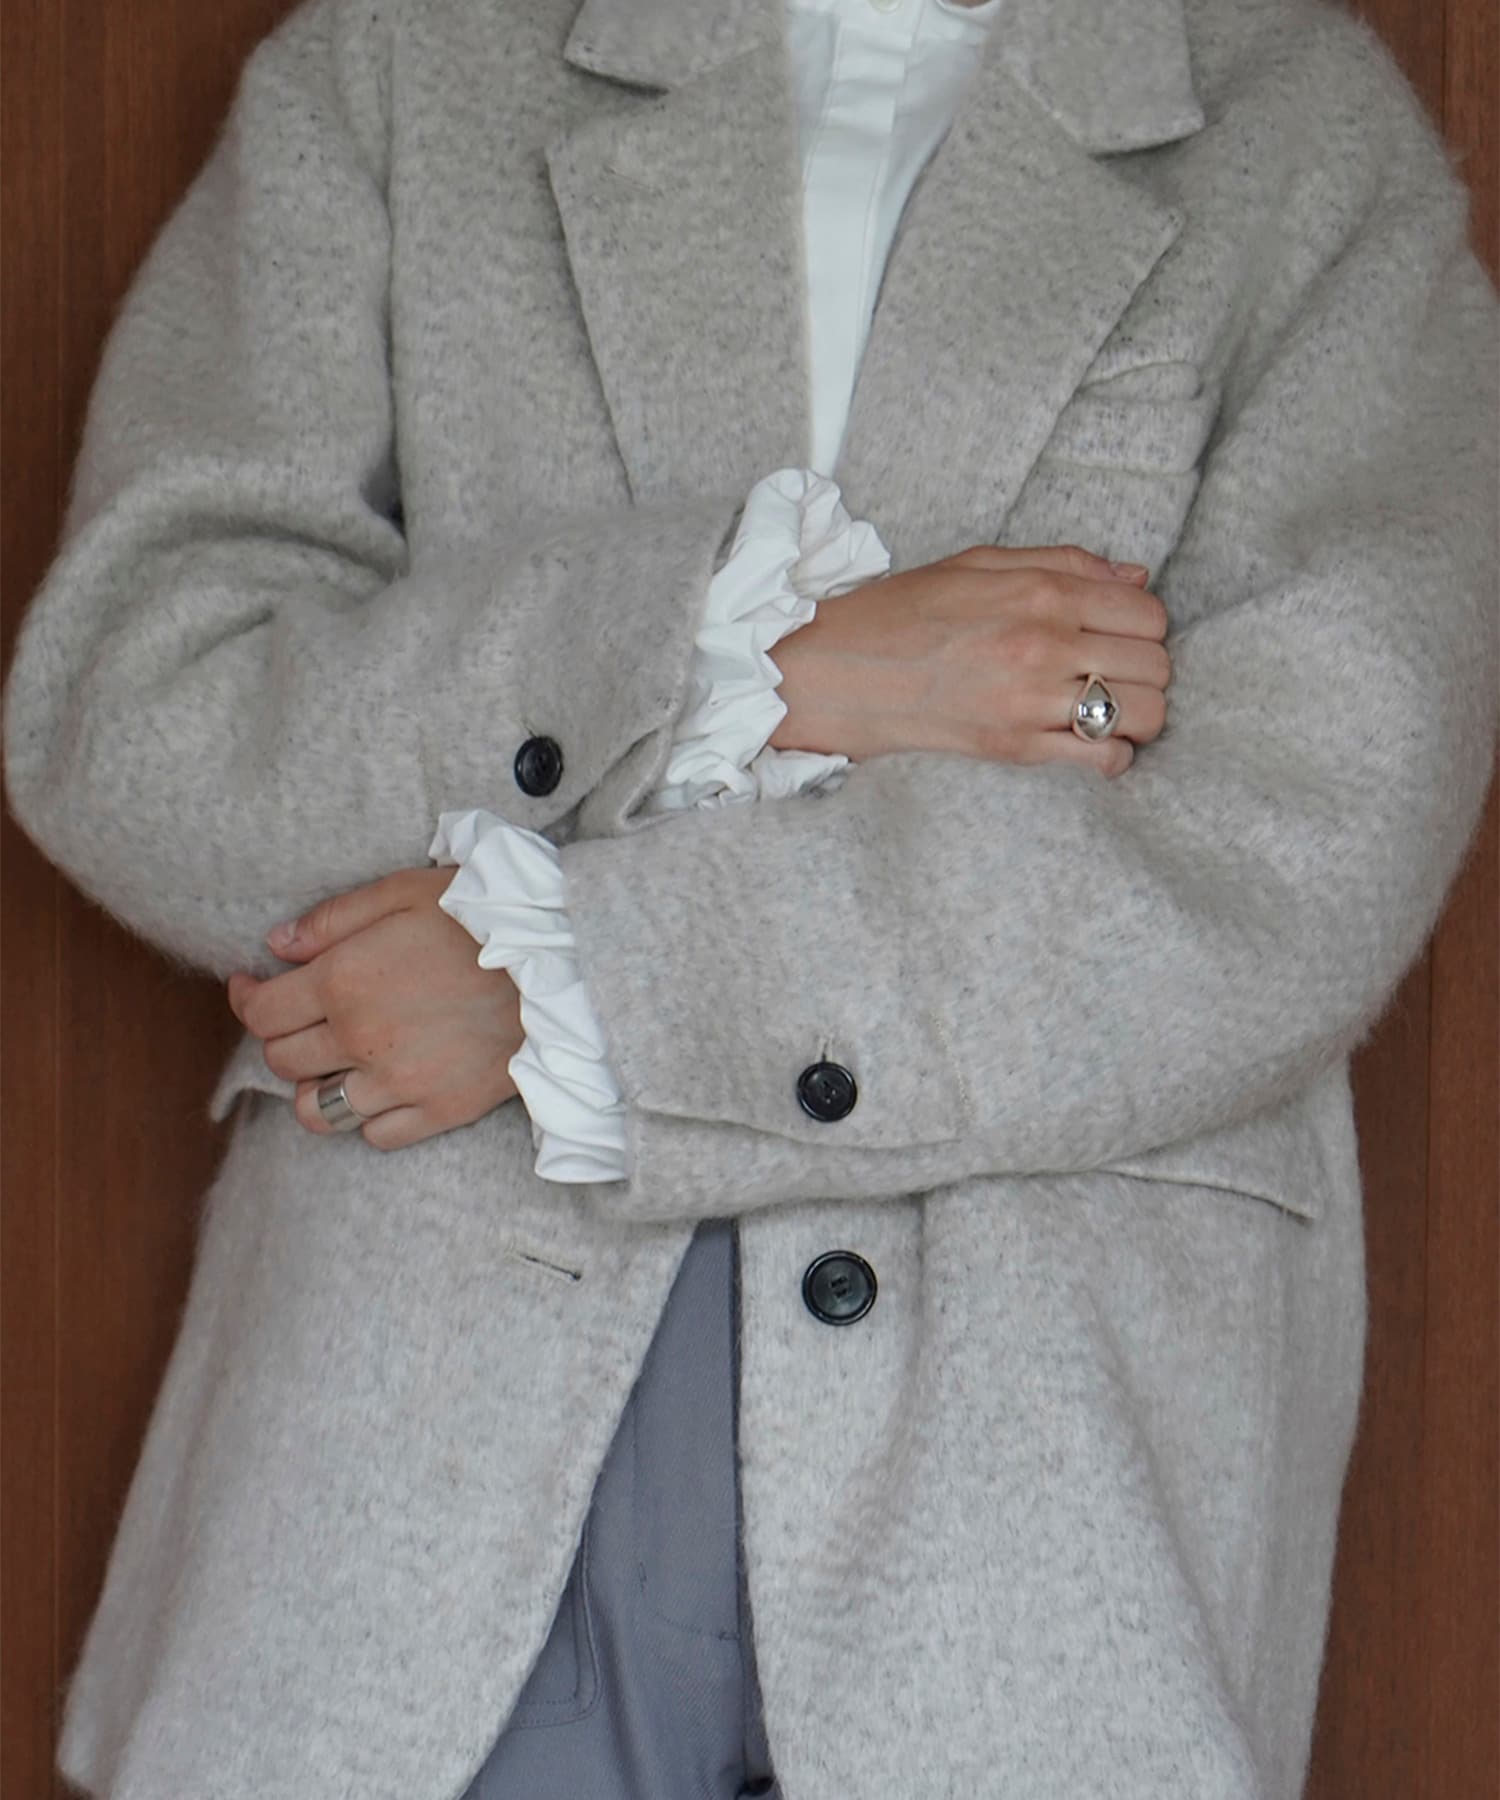 MIX SHAGGY OVER TAILORED JACKET(1 IVORY): CLANE: WOMENS｜ STUDIOUS